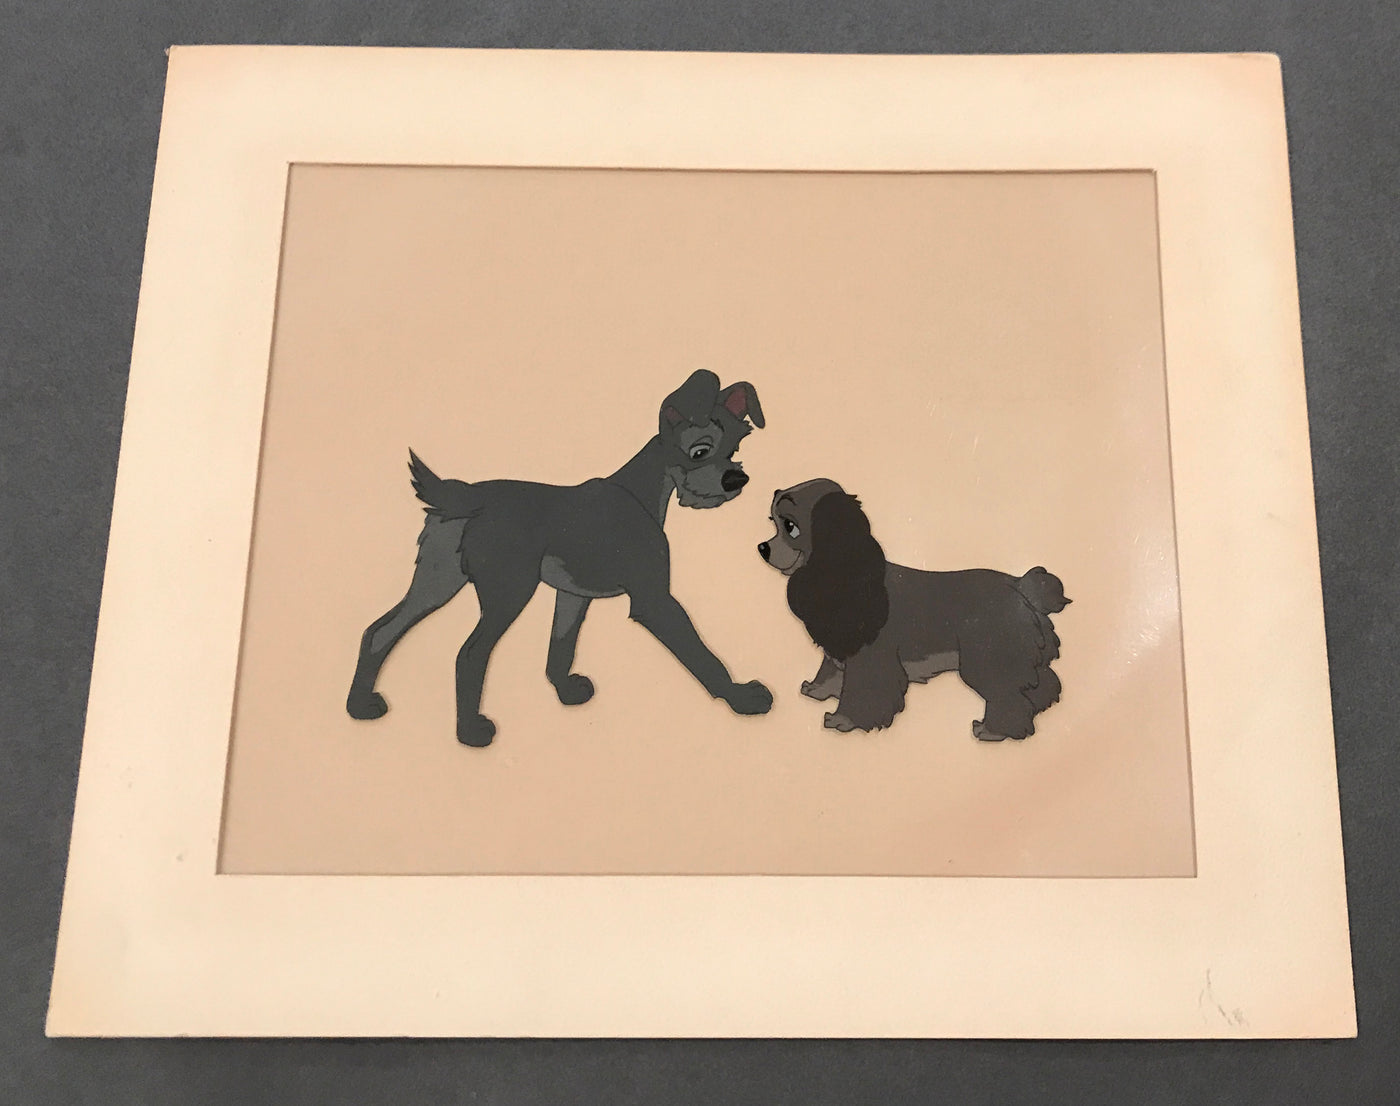 Original Walt Disney Production Cel from Lady and the Tramp featuring Tramp and Lady